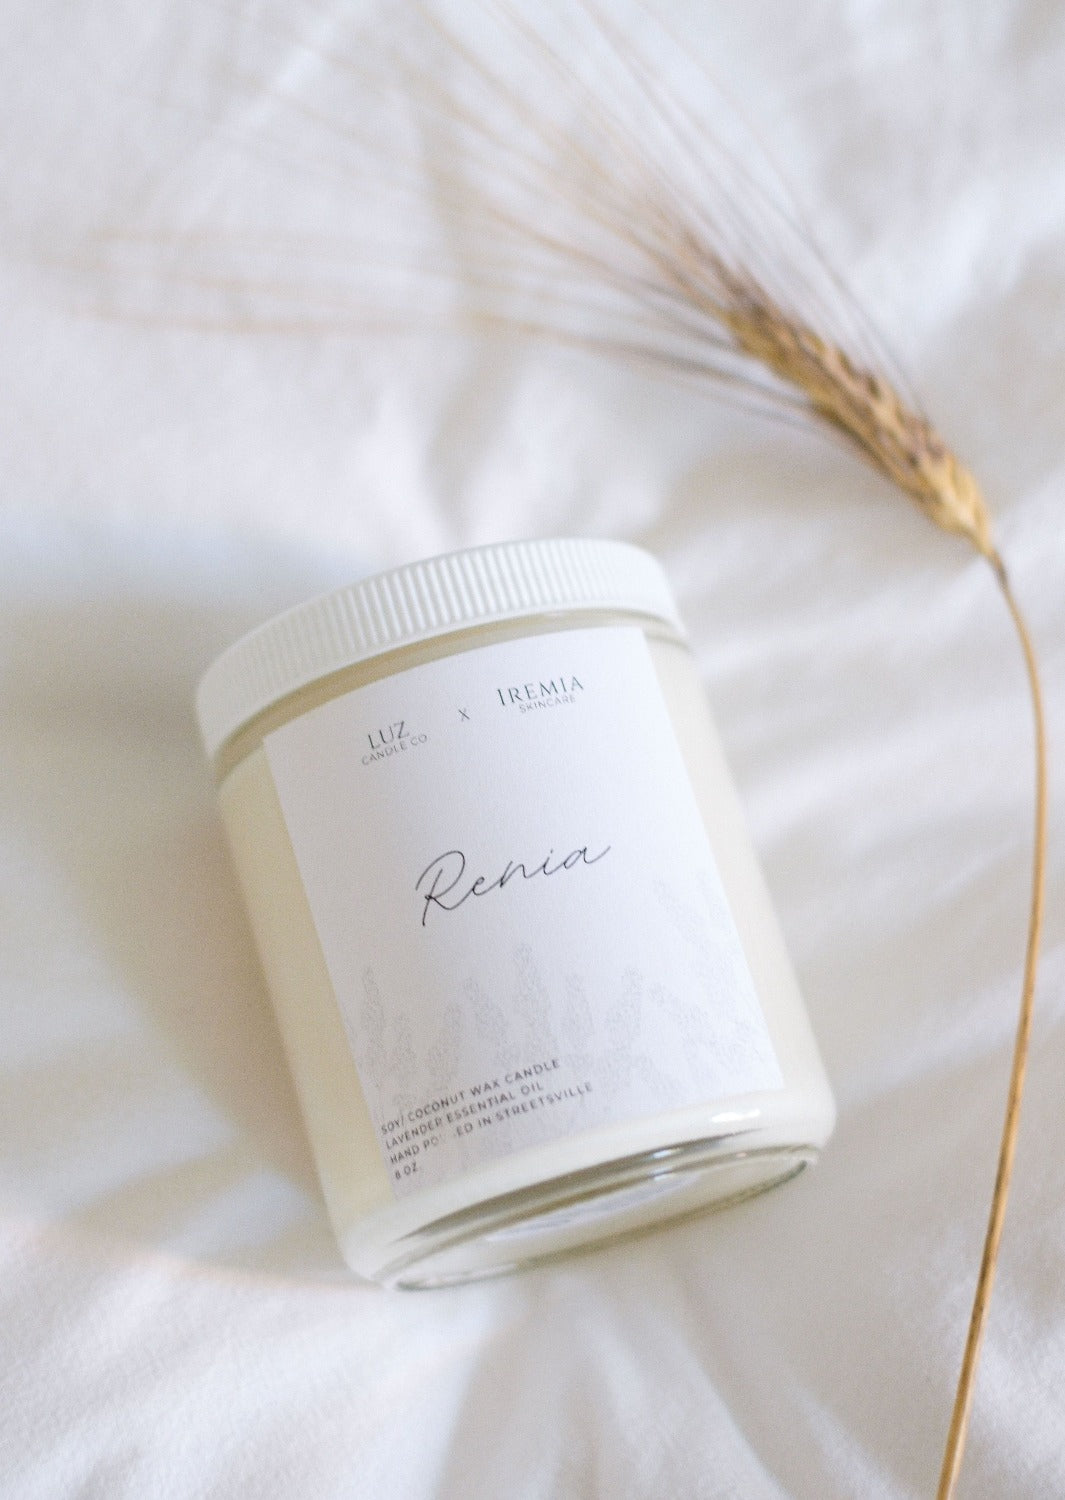 Renia Candle by Luz Candles. It is made with natural soy and coconut waxes and blended together with essential oils that are free of parabens and phthalates. Zero dyes or chemicals are added to the blend. High-quality wooden wicks are used, that produce a beautiful flame and nostalgic fire crackling sound while burning. 